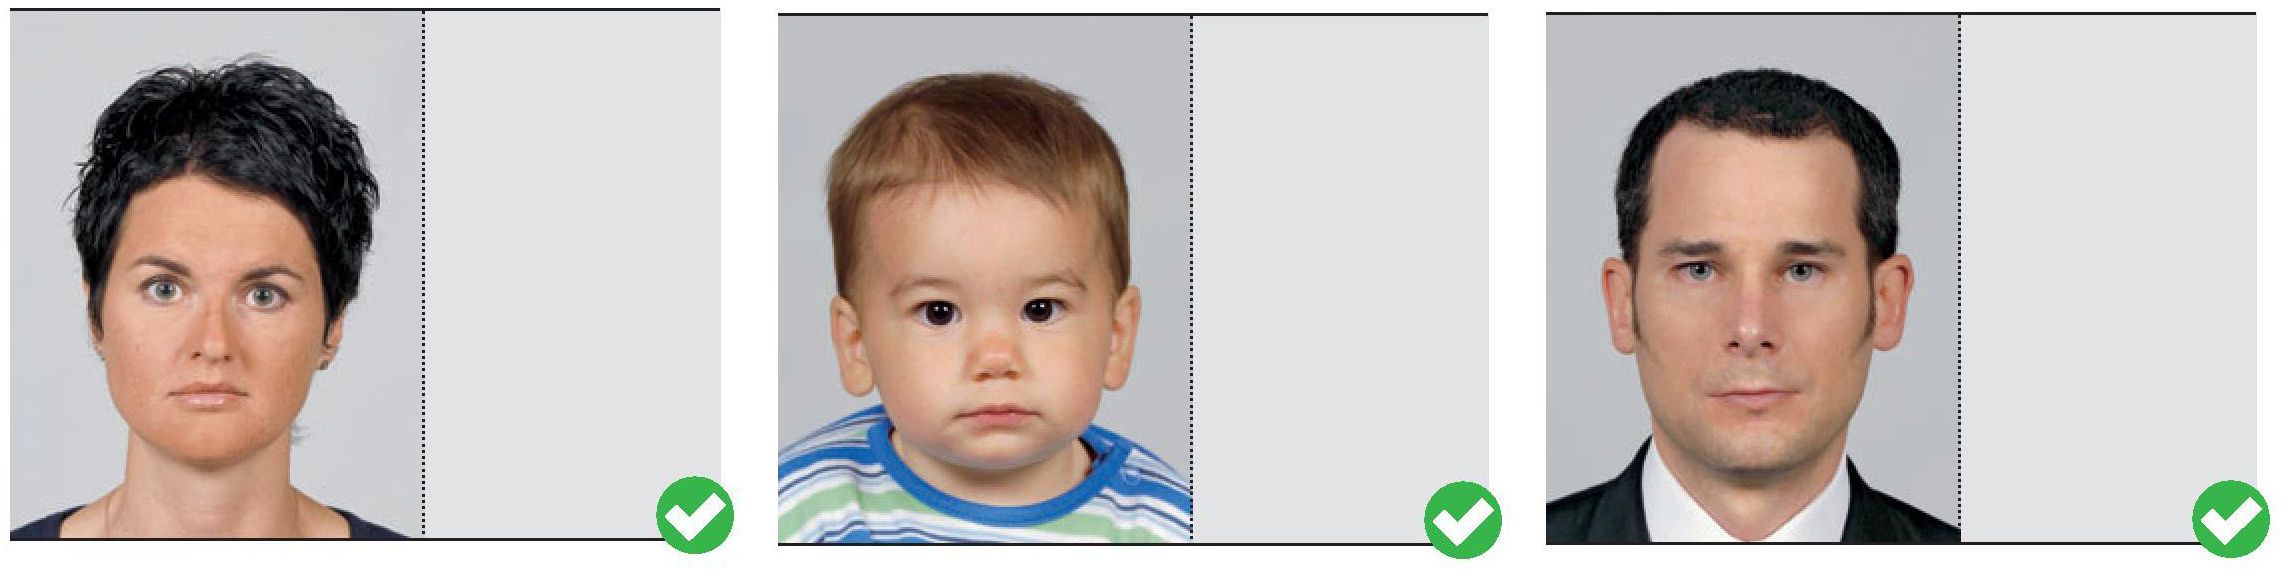 Some examples of perfect visa photo